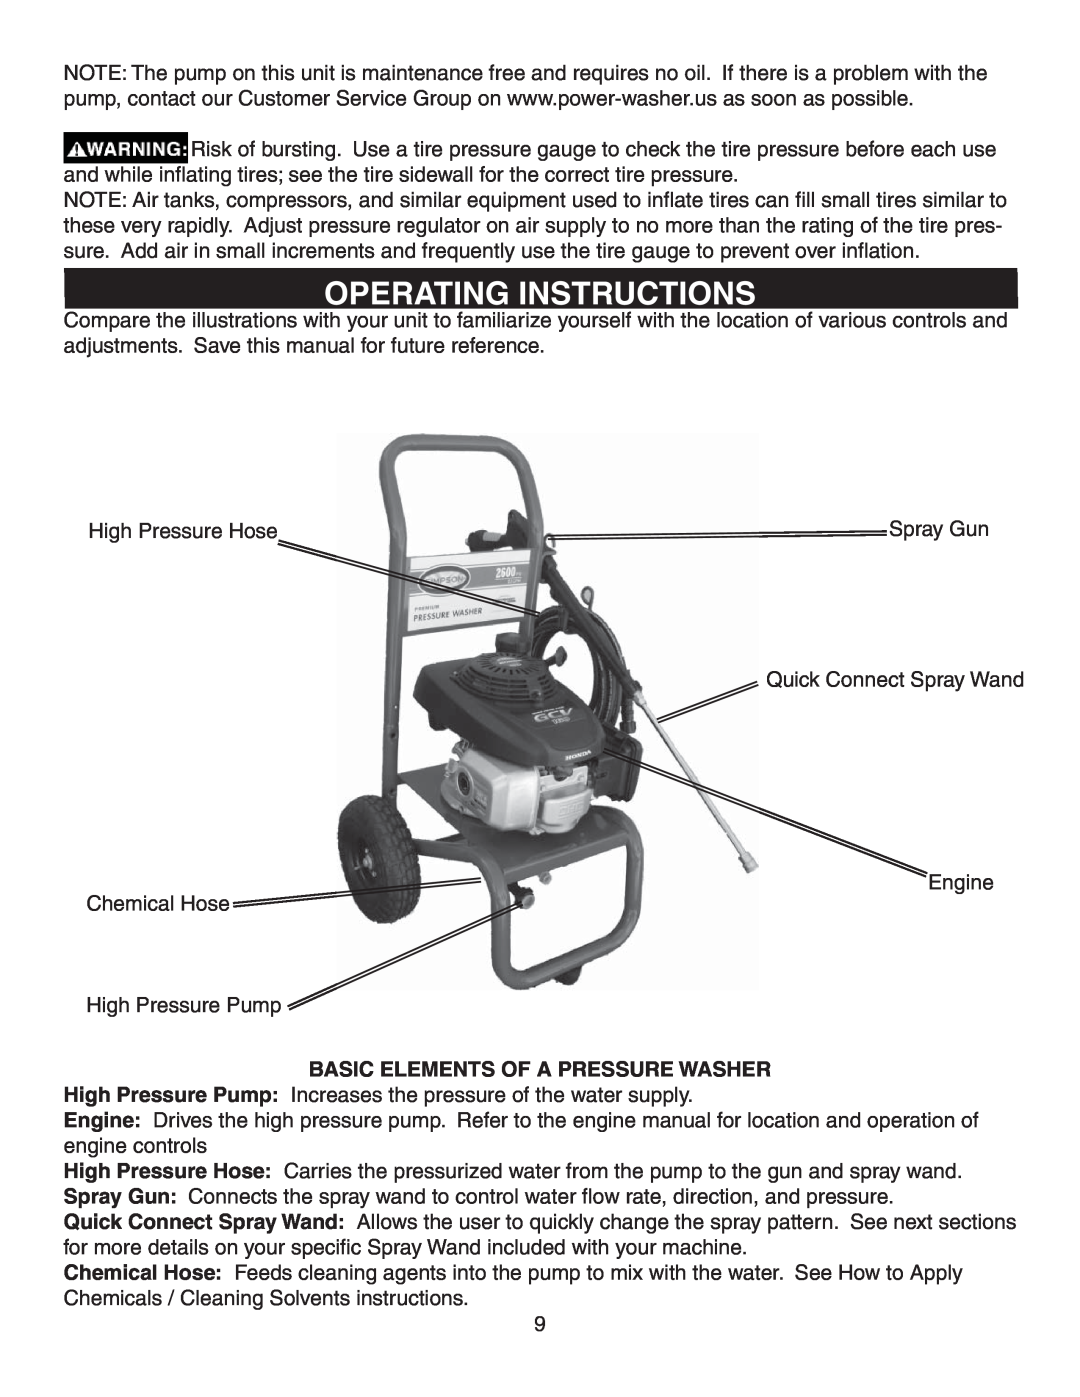 Simpson MSV2600, MSV3000 warranty Operating Instructions, Basic Elements Of A Pressure Washer 